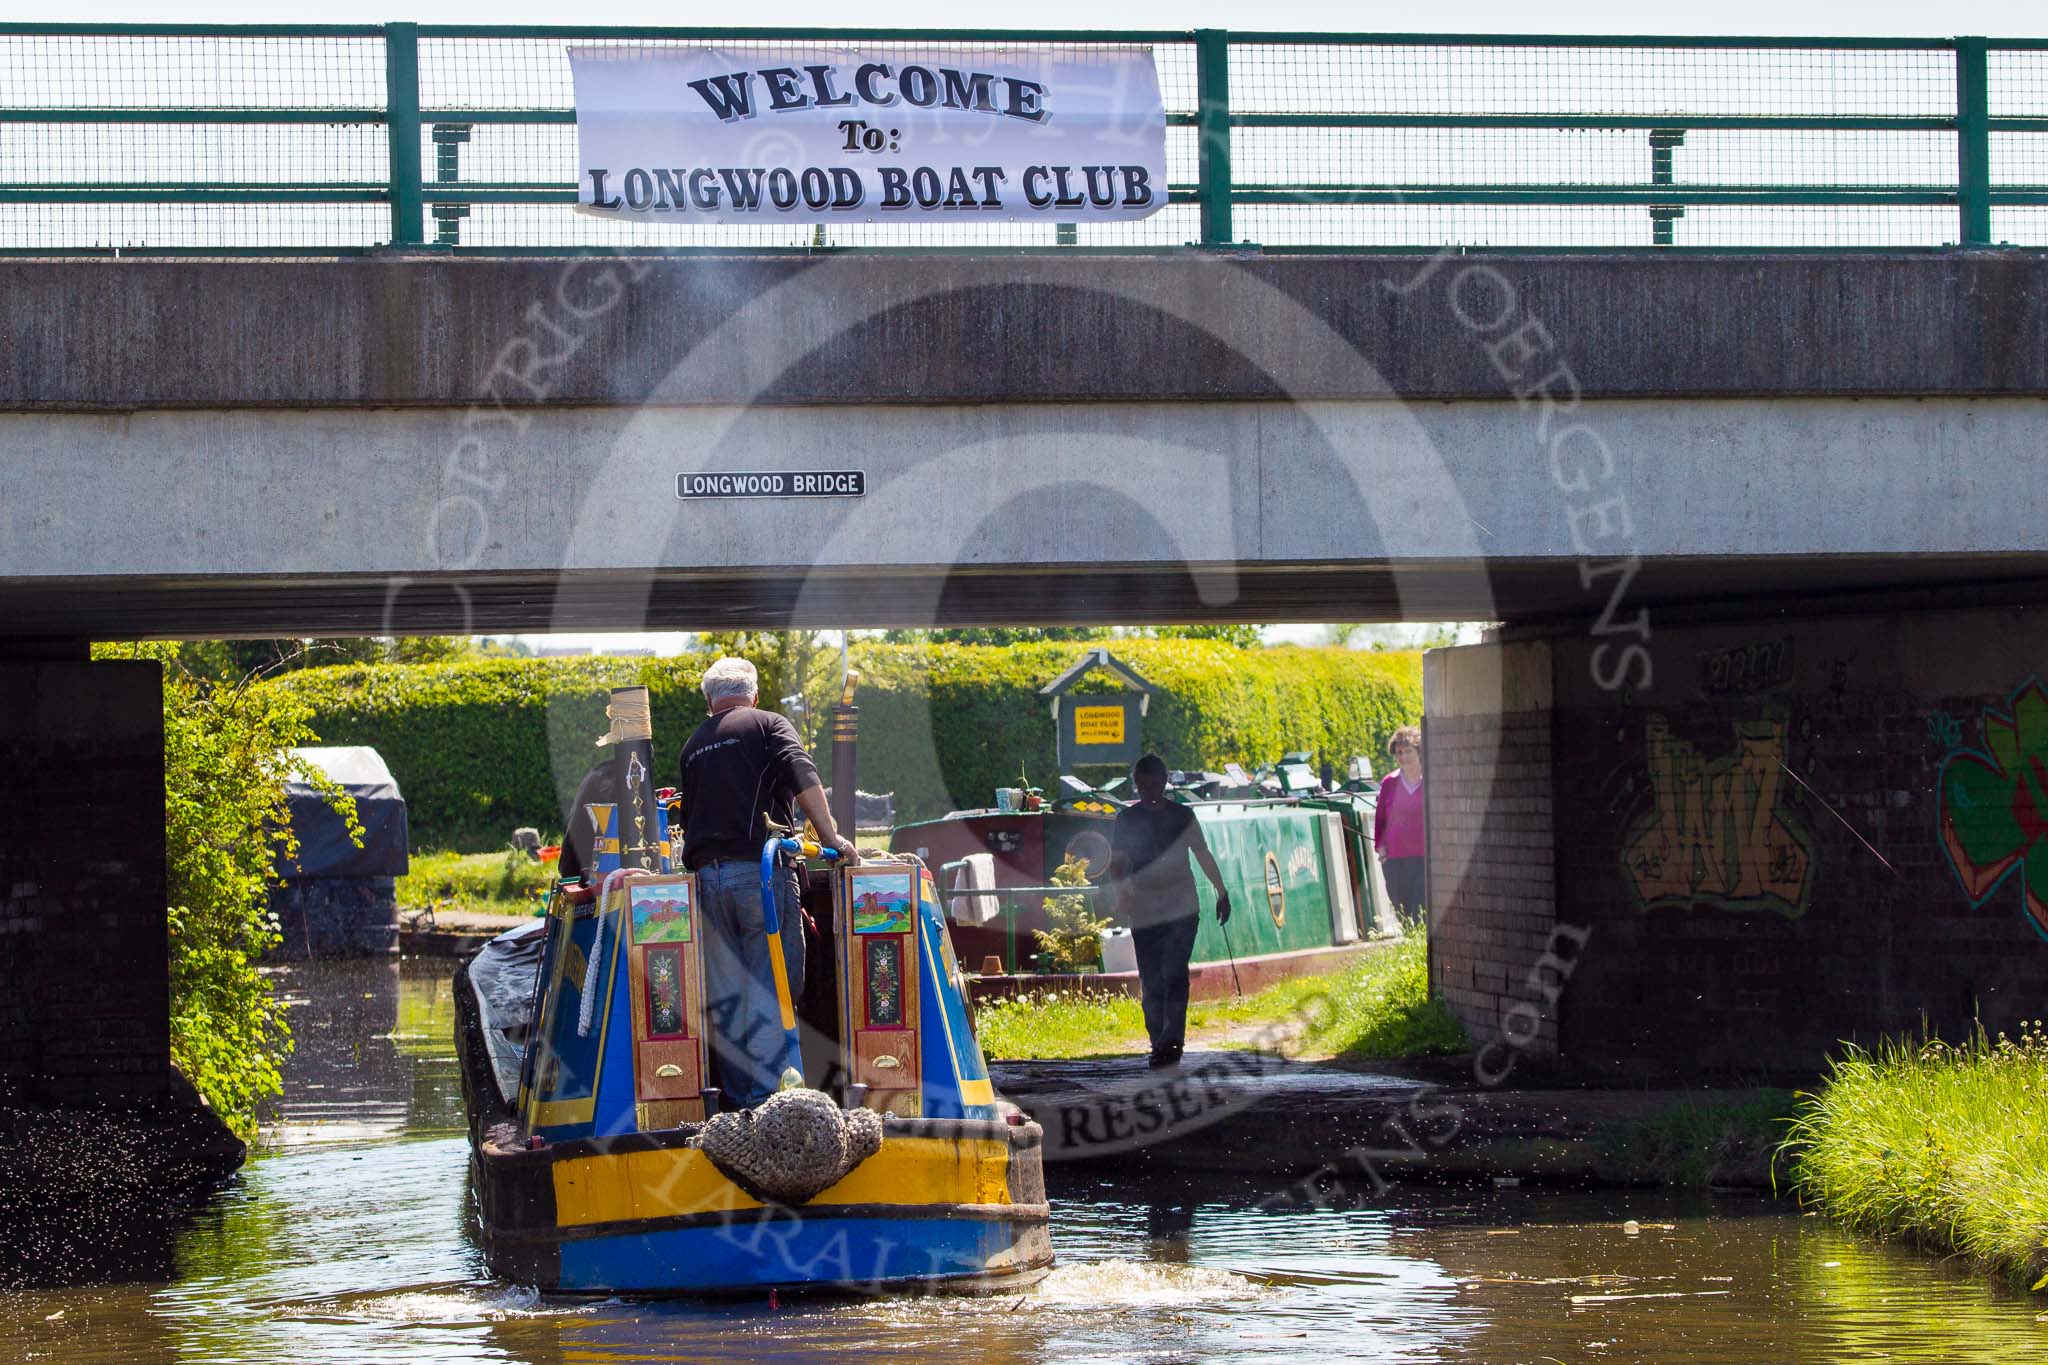 BCN Marathon Challenge 2013: "Welcome to Longwood Boat Club": Longwood Bridge on the Daw End Branch, the "finish line" of the BCN Marathon Challenge..
Birmingham Canal Navigation,


United Kingdom,
on 26 May 2013 at 14:06, image #414